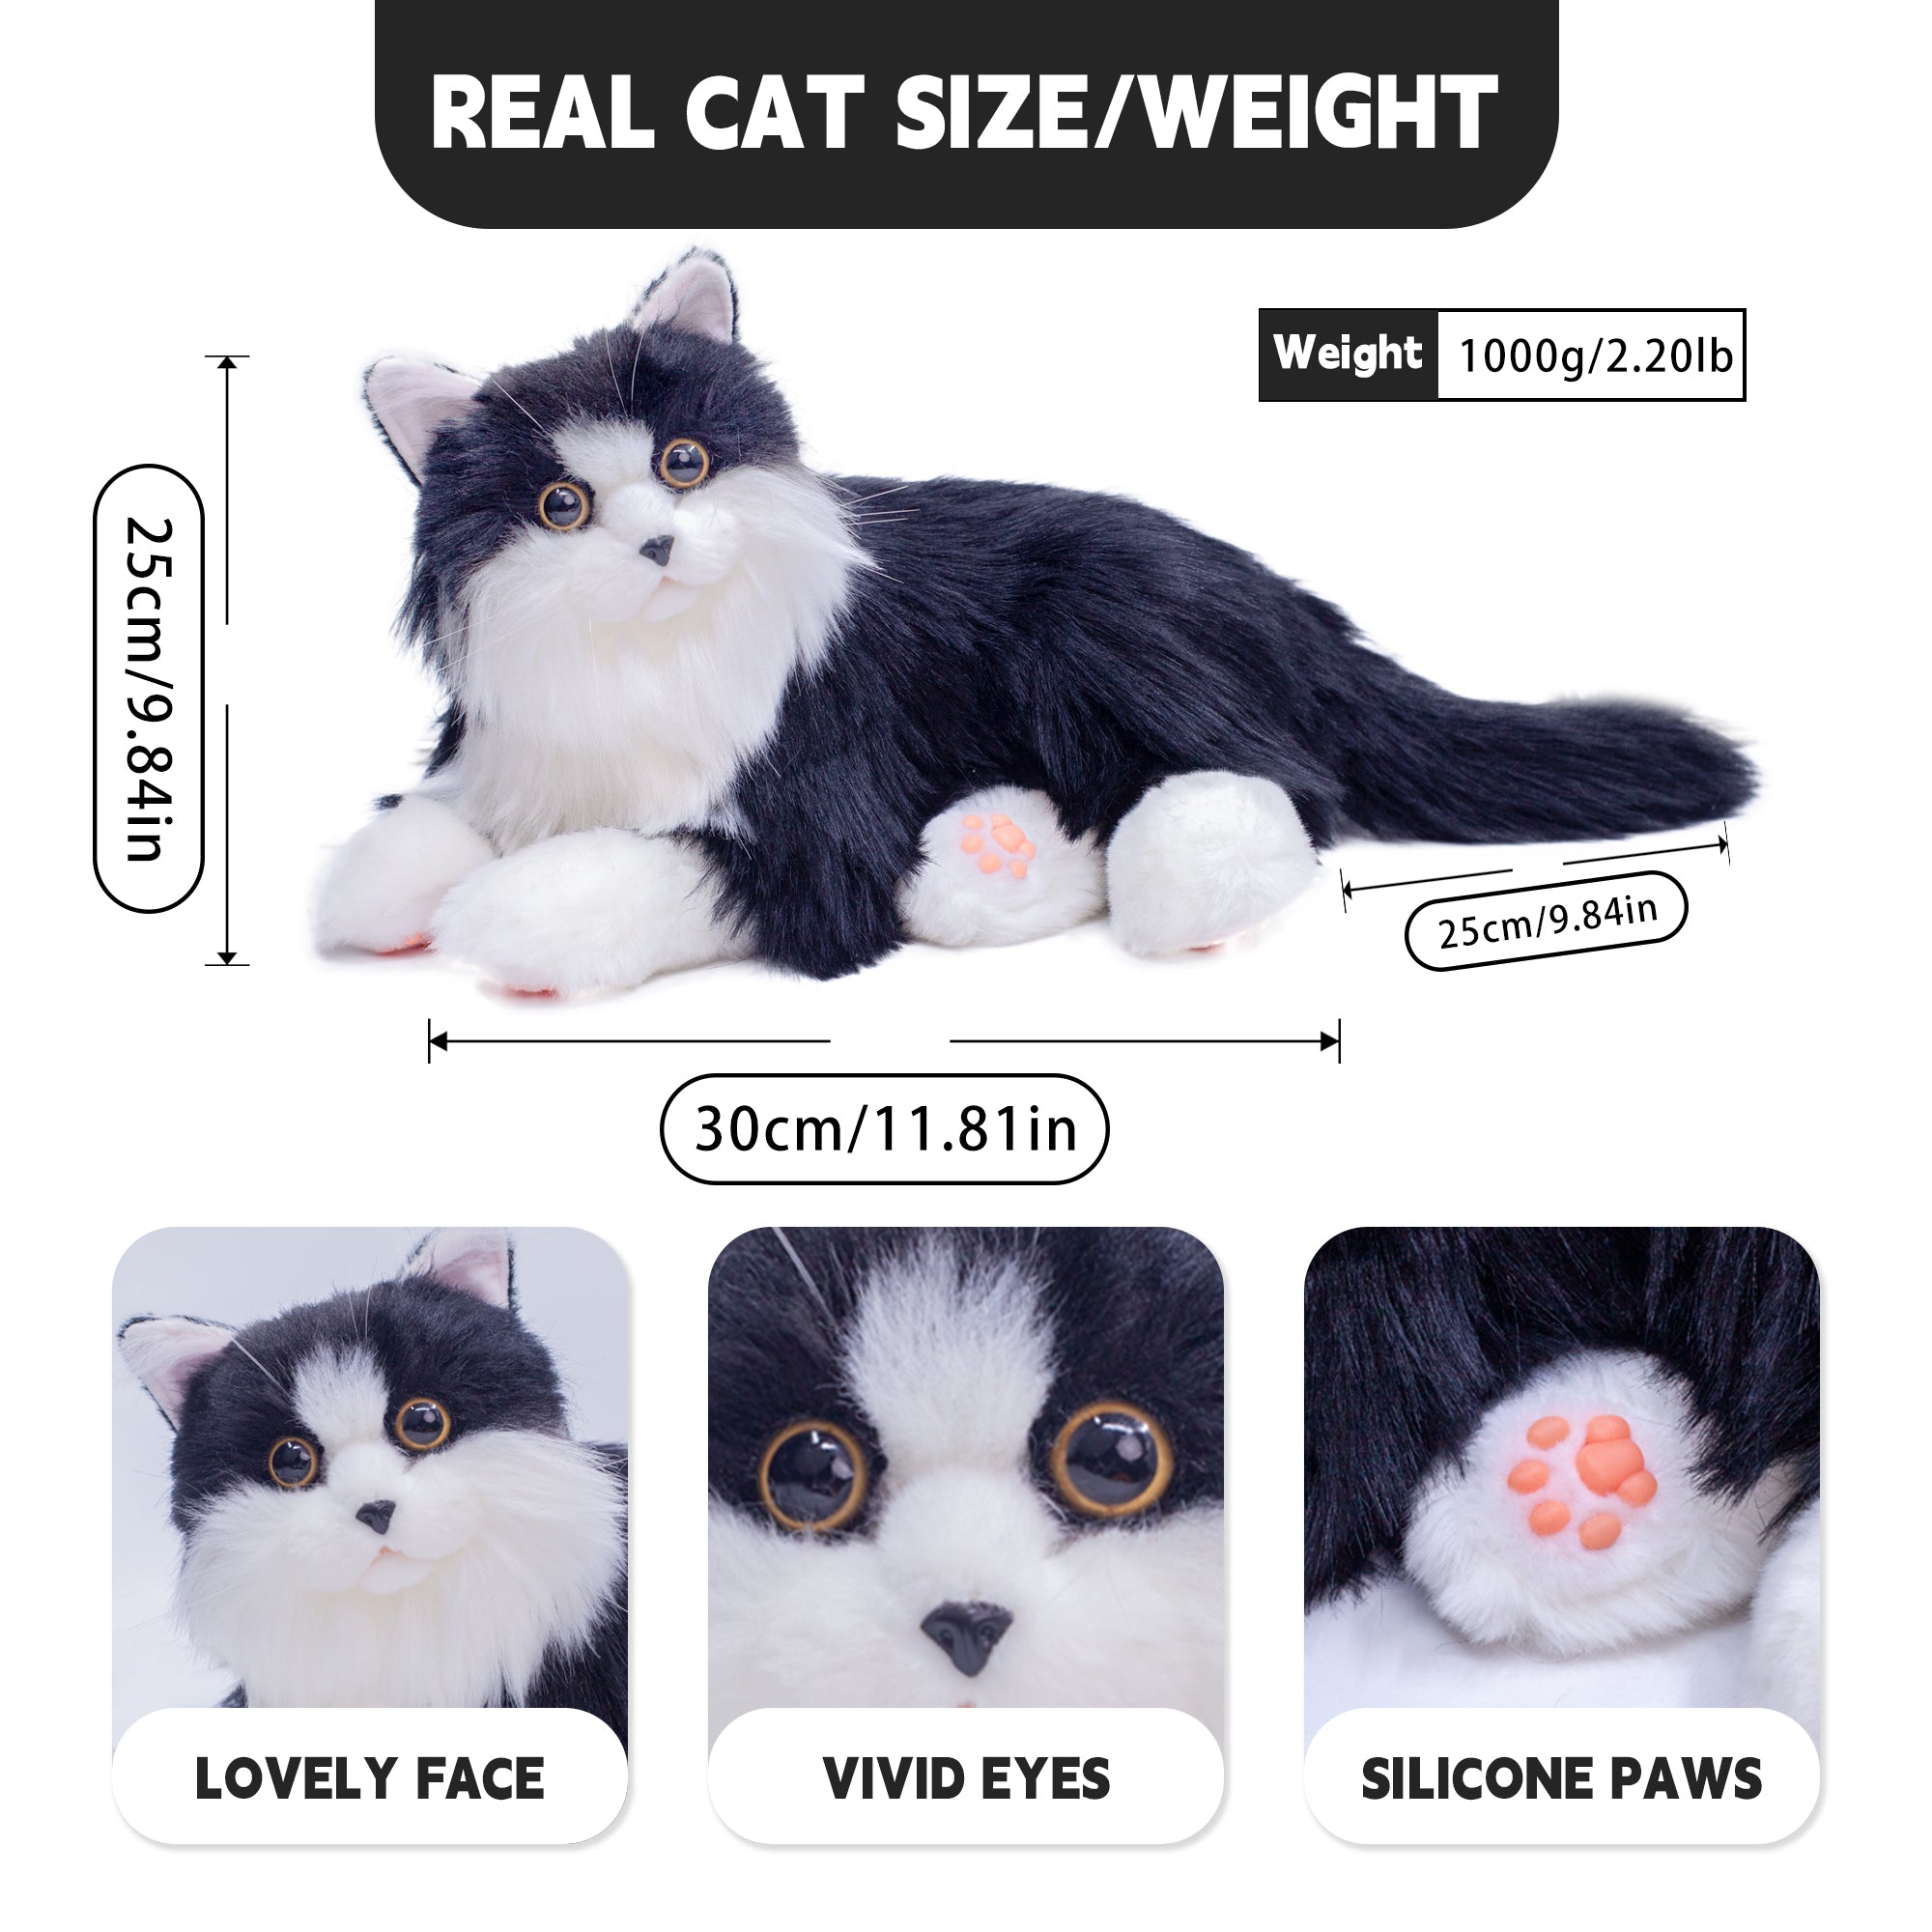 Chongker Interactive Companion Robot Pets Realistic Stuffed Animals Cat Plush Voice Heartbeat and Purring,Gifts for Parents - Chongker